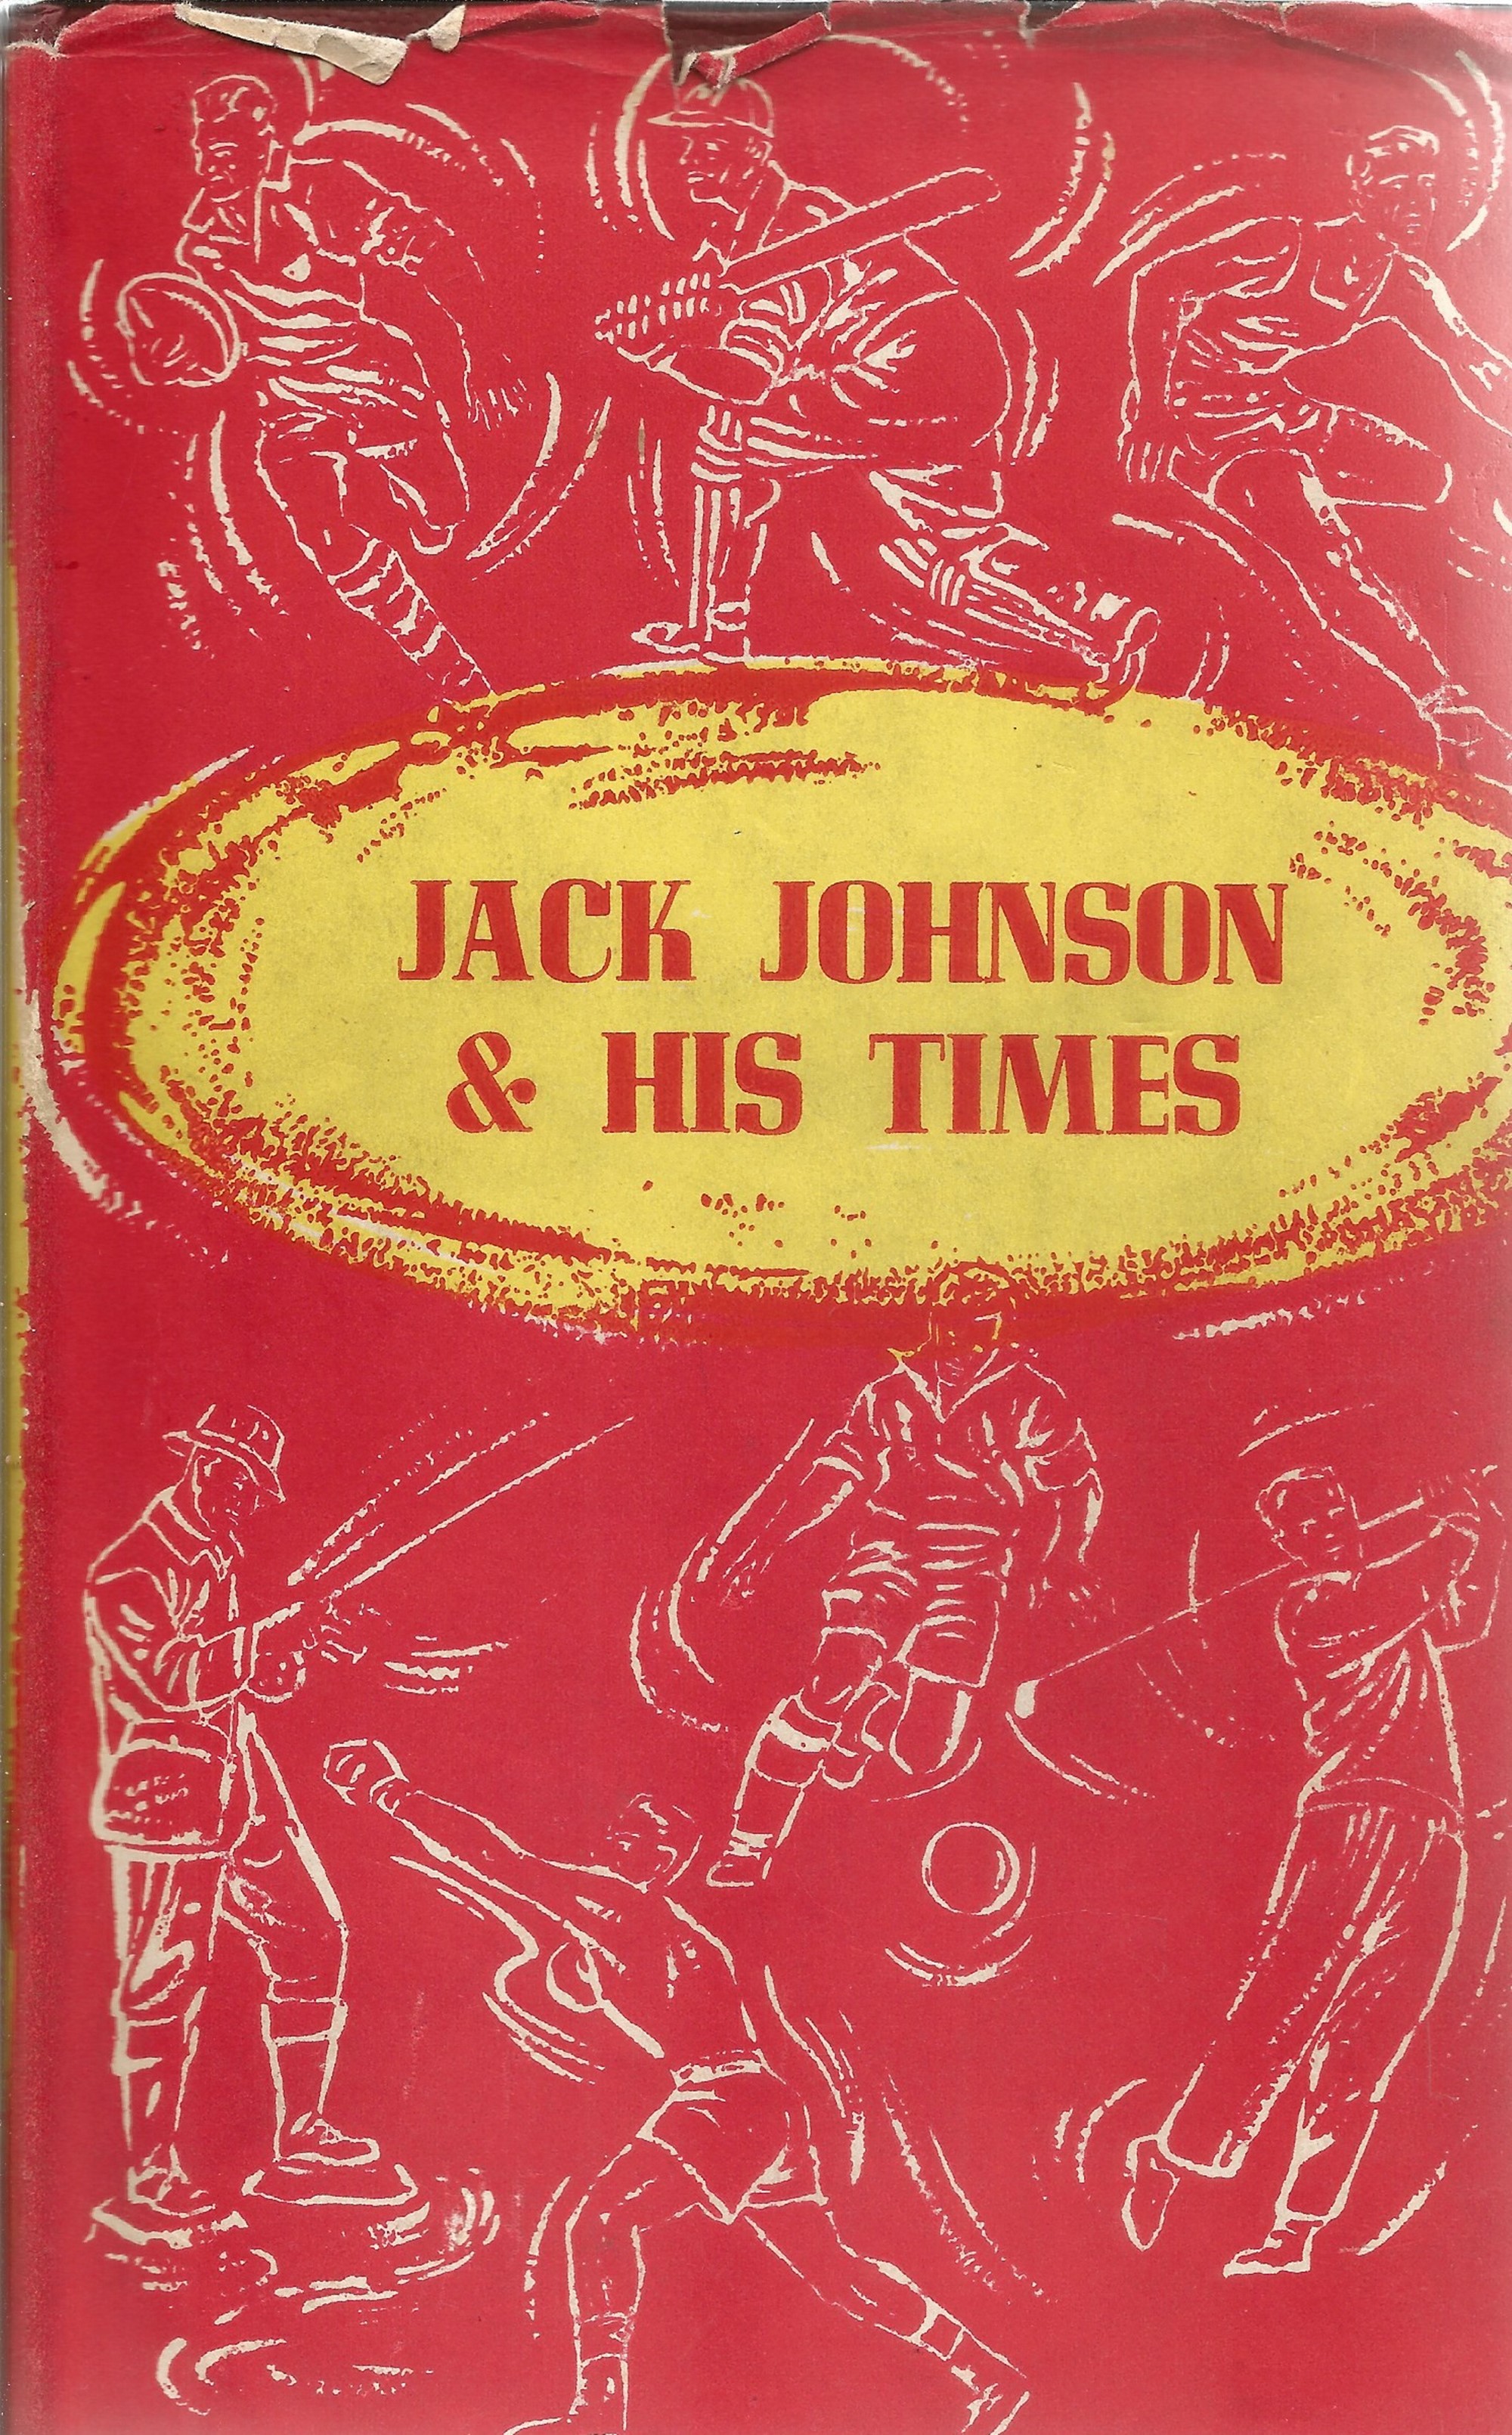 Boxing. Denzil Batchelor Hardback Book Titled Jack Johnson and his times. This Edition was Specially